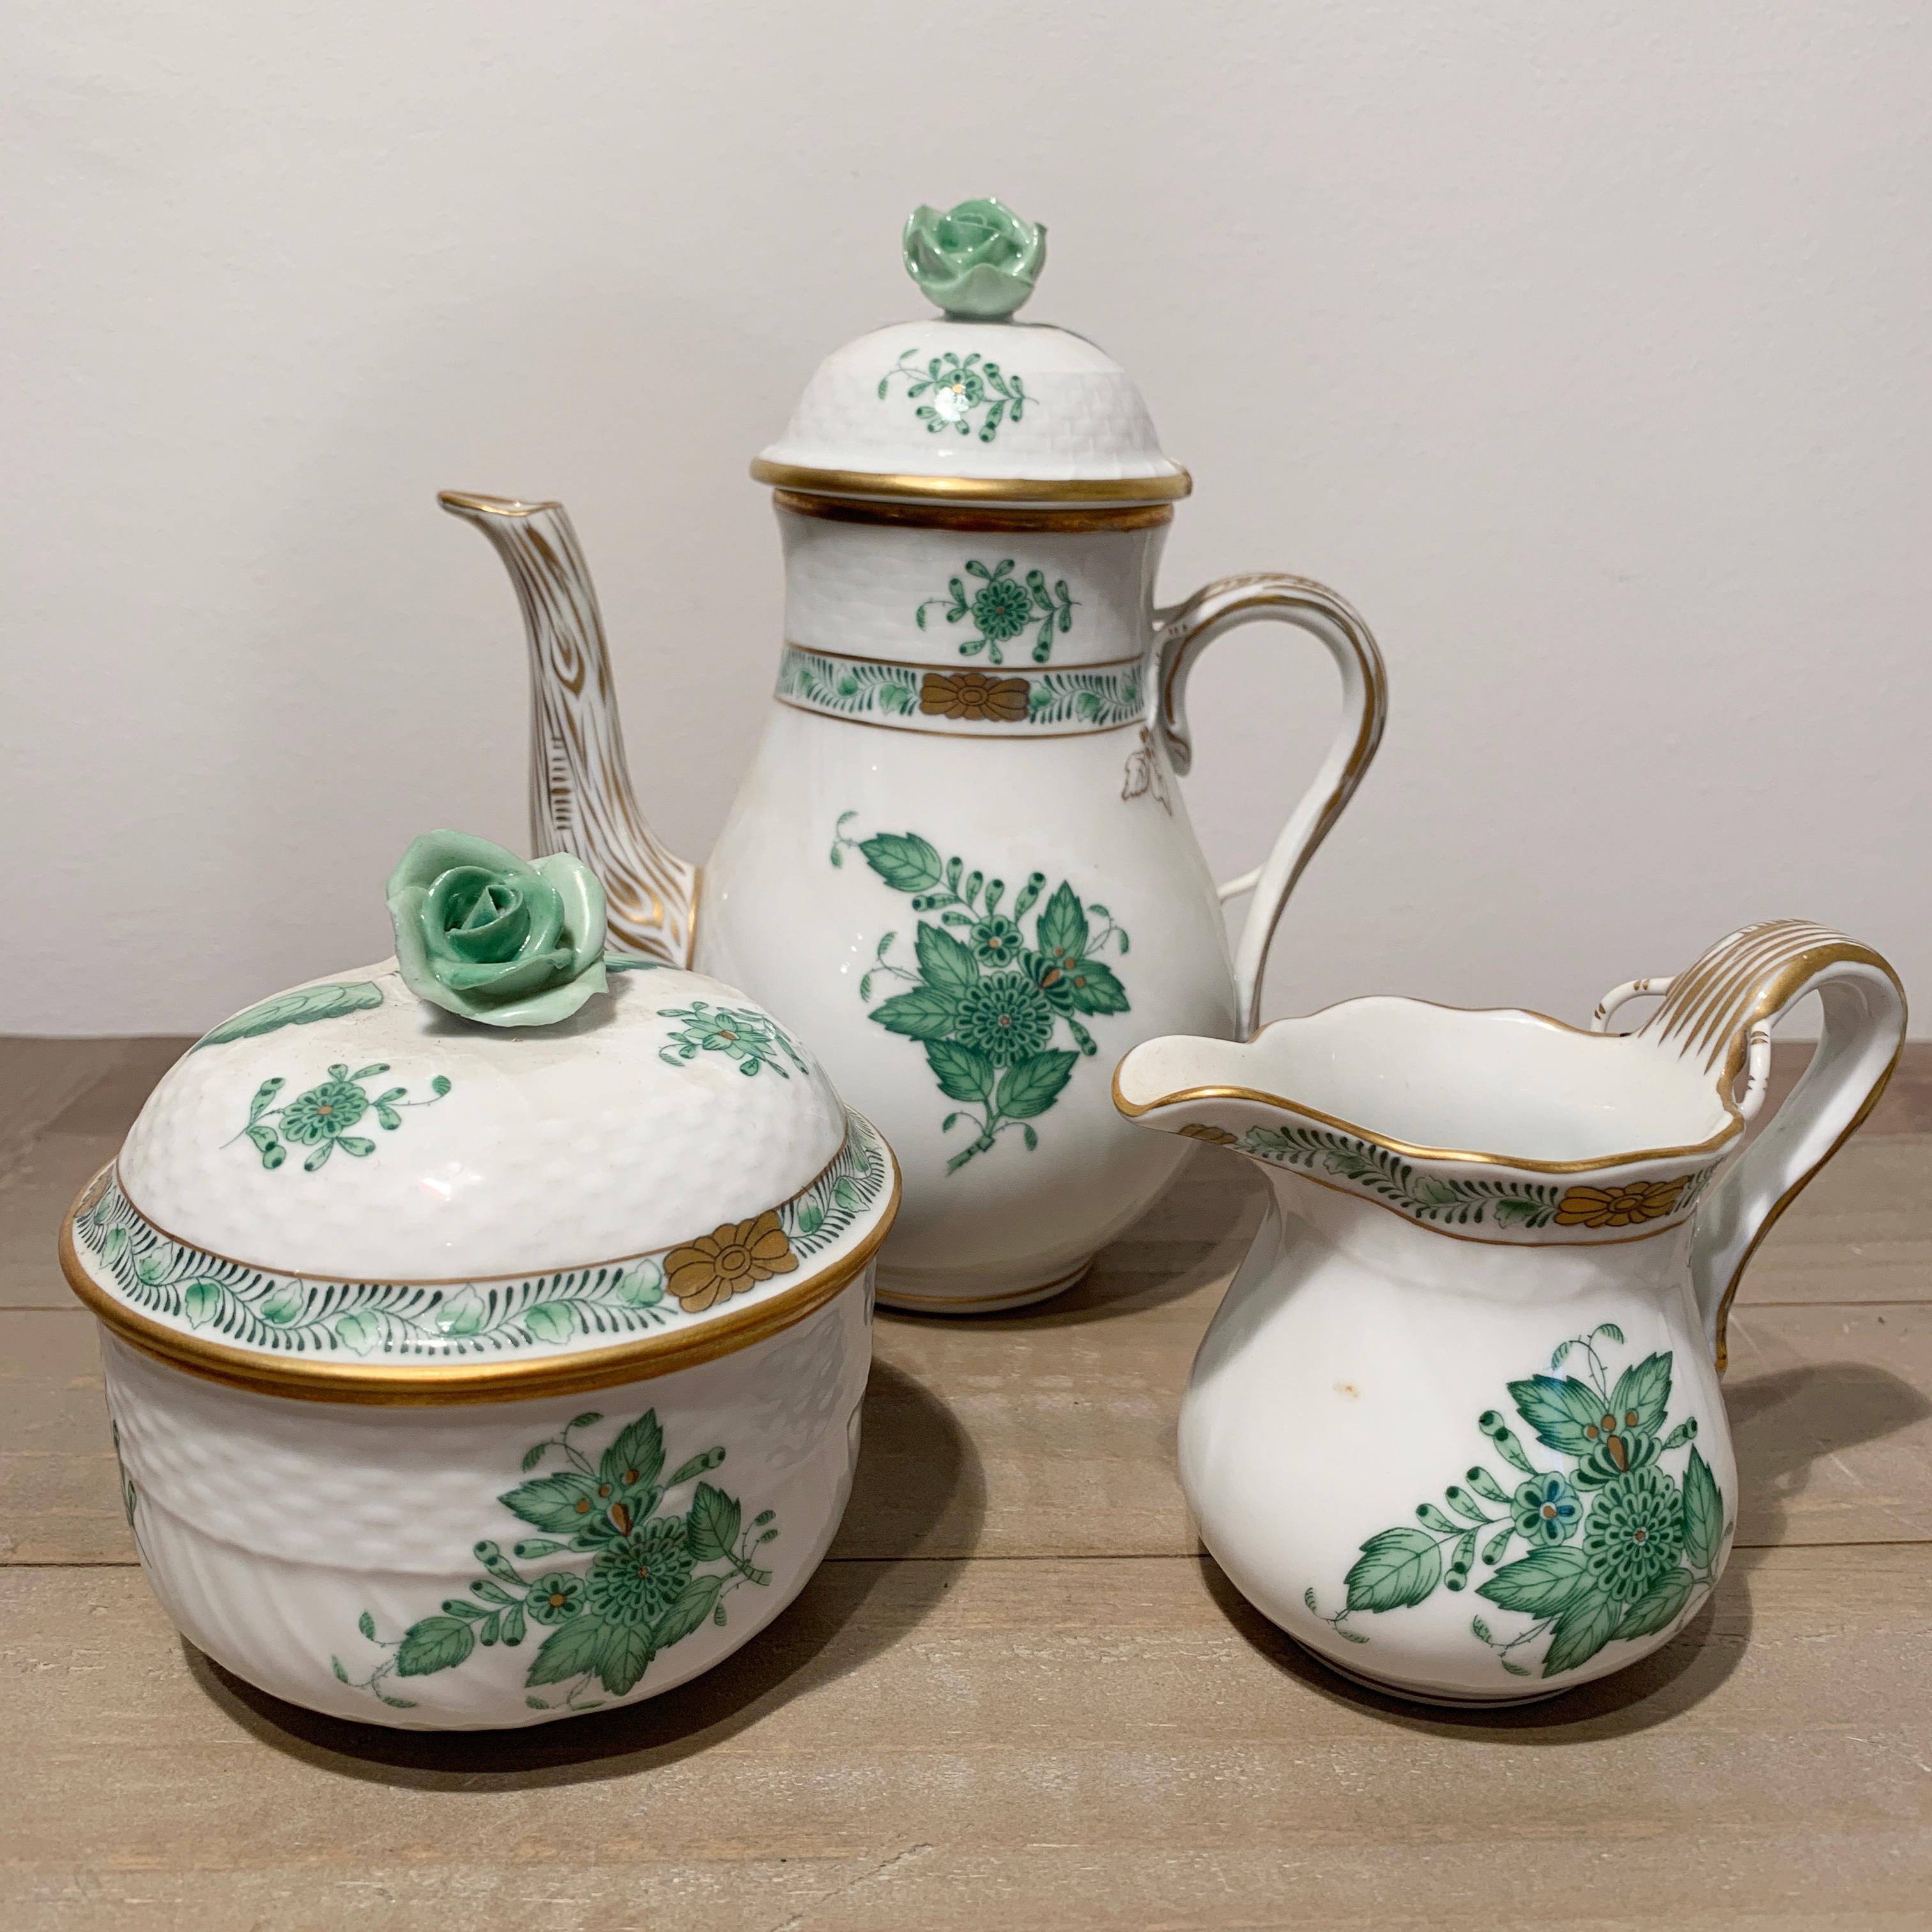 Herend Chinese bouquet apponyi green coffee set
Hungarian porcelain
A coffee set with coffee pot, 6 cups and saucers, milk jug and a sugar bowl
The set is stamped on the underside, Herend
Hand painted floral design all over and a small bouquet